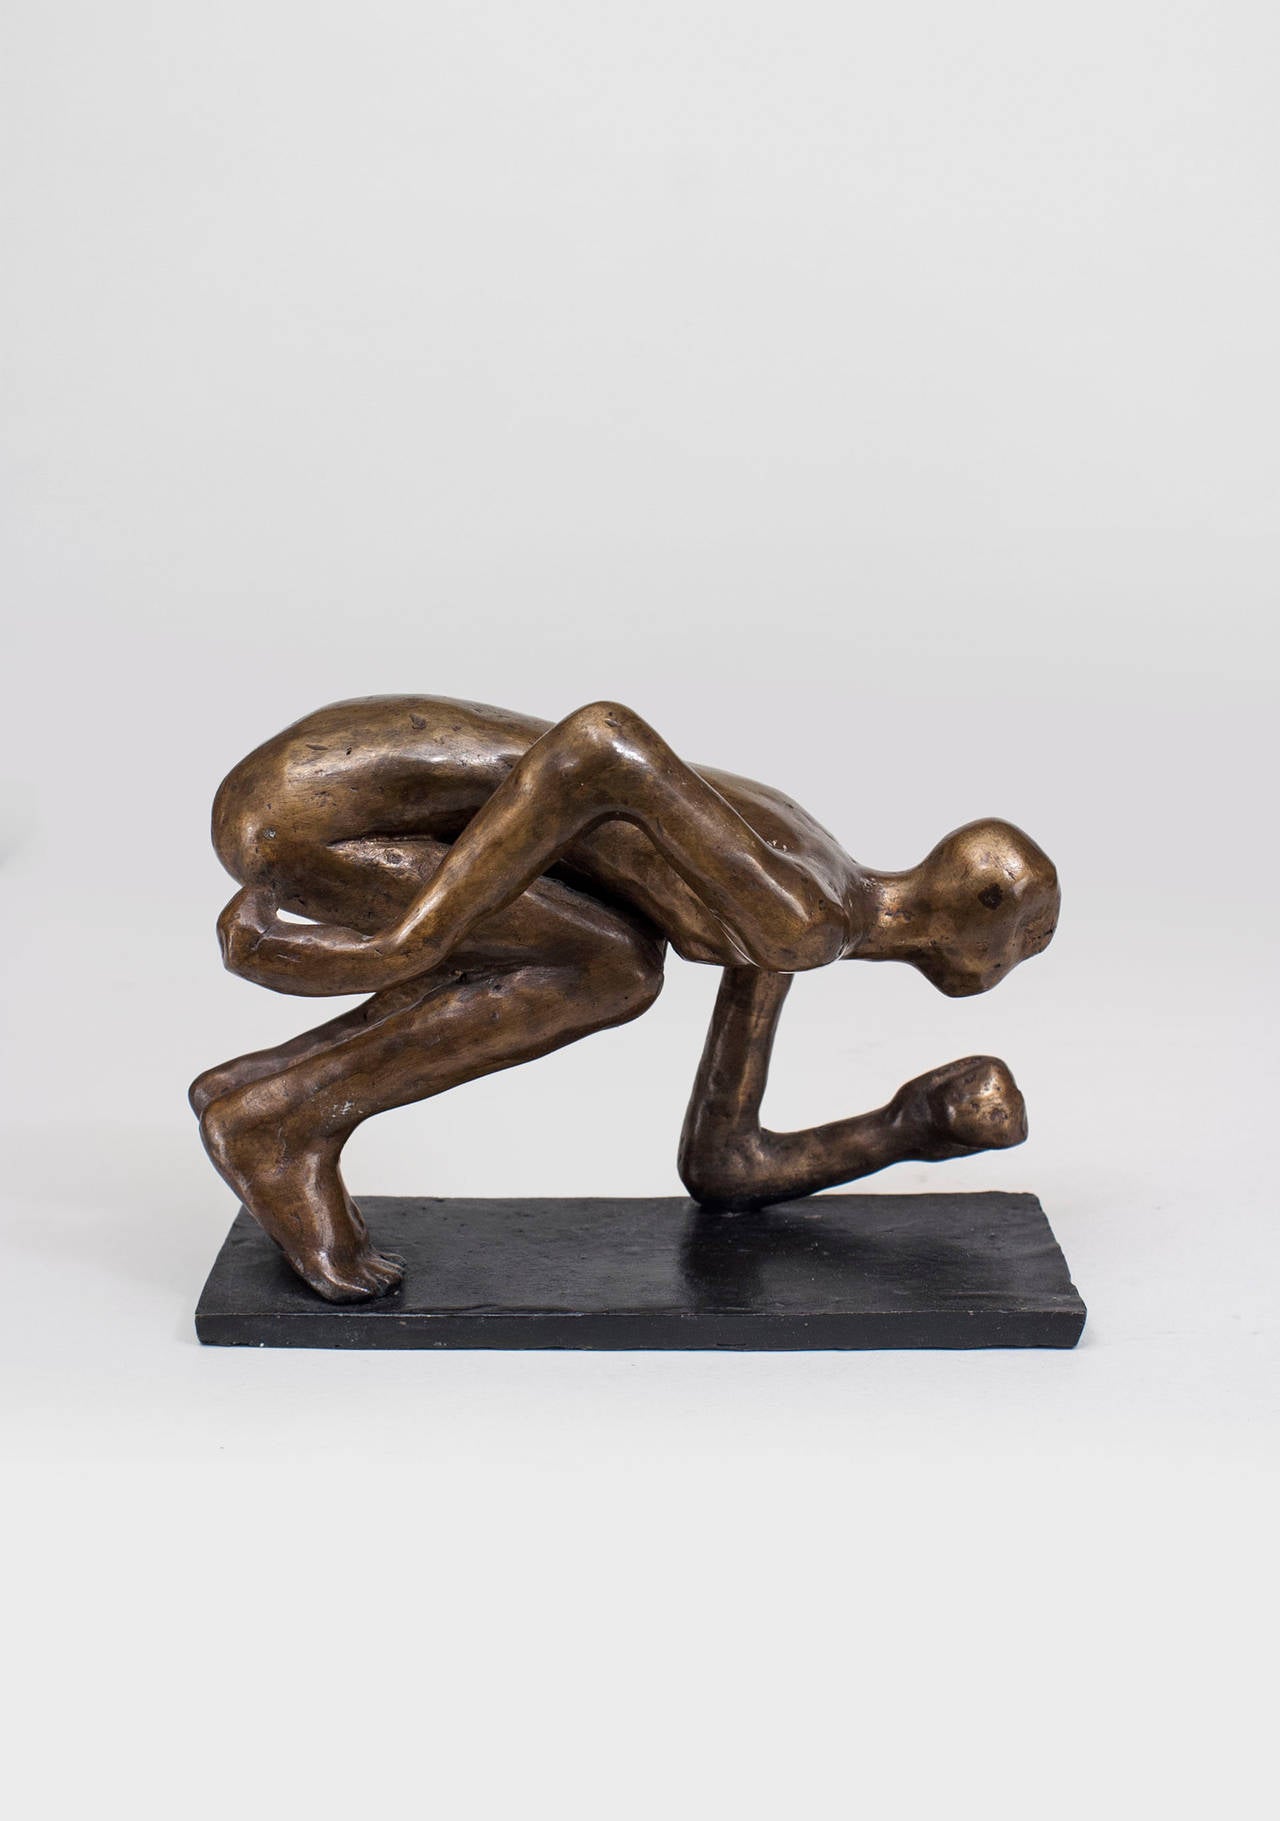 American Post-Modern Design bronze sculpture of a kneeling figure with lowered arms on a narrow rectangular base, (signed: CAROL BRUNS, 2003)
